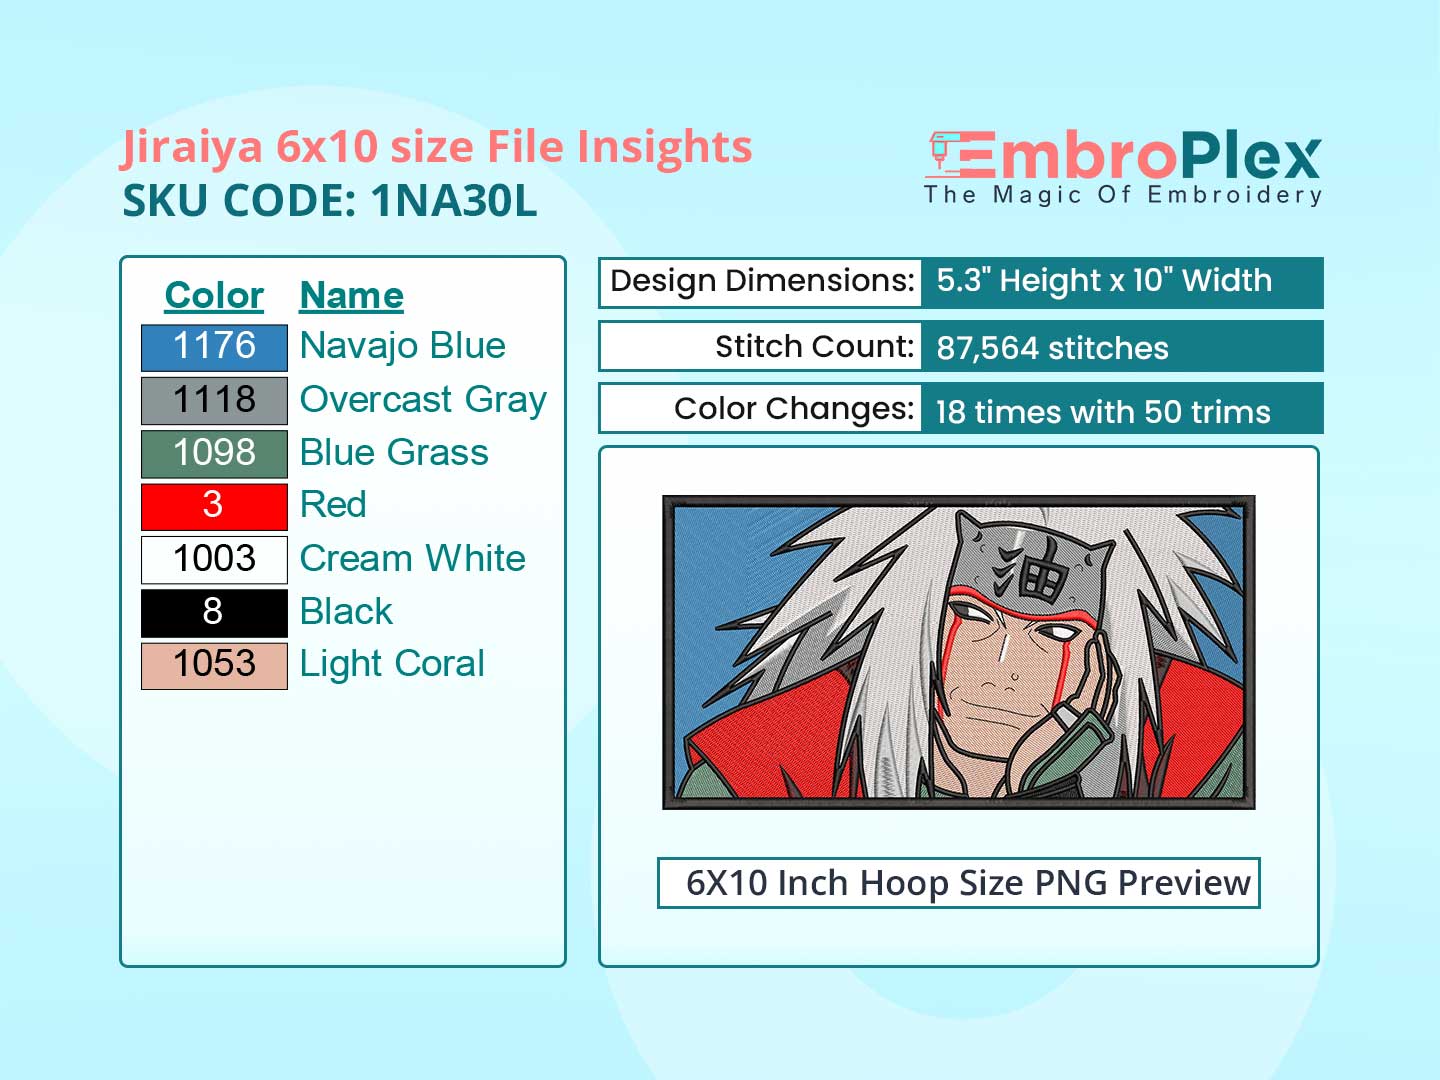 Anime-Inspired Jiraiya Embroidery Design File - 6x10 Inch hoop Size Variation overview image